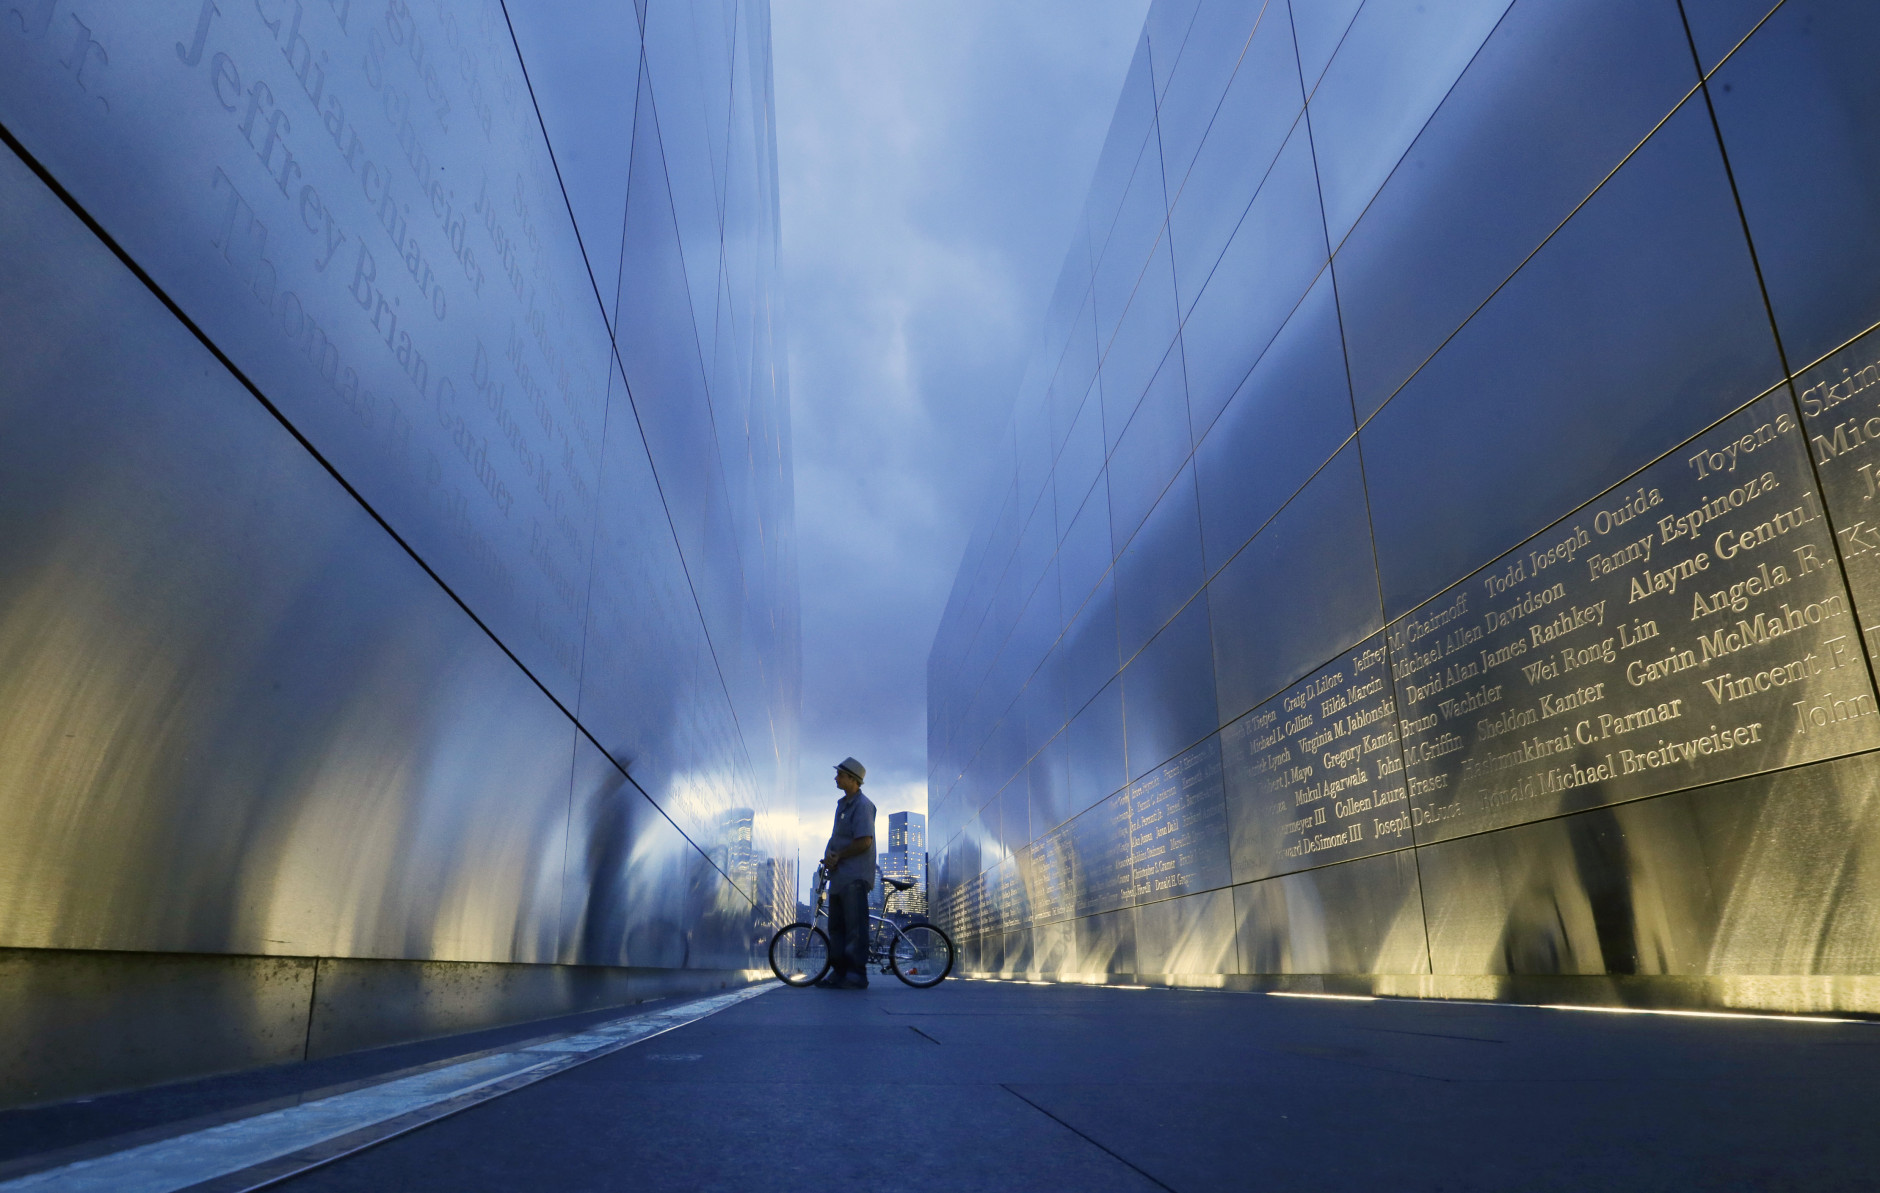 Tamir Rivera, of Newark, N.J., pauses to look at the names on the "Empty Sky" memorial to New Jersey's victims of the Sept. 11, 2001 terrorist attacks early Friday, Sept. 11, 2015, in Jersey City, N.J.  Victims' relatives began marking the 14th anniversary of Sept. 11 in a subdued gathering Friday at ground zero, with a moment of silence and somber reading of names. (AP Photo/Mel Evans)